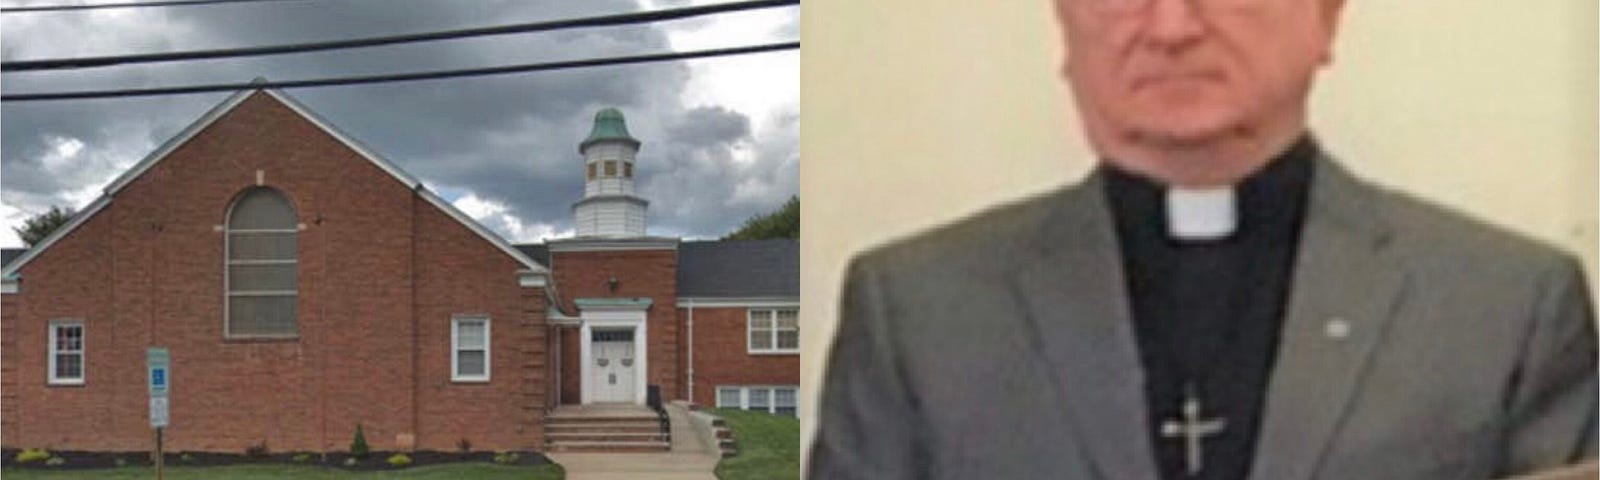 Dr. Rev. Williams Weaver and his church — Pastor Performed Oral Sex Exorcism On His Victims